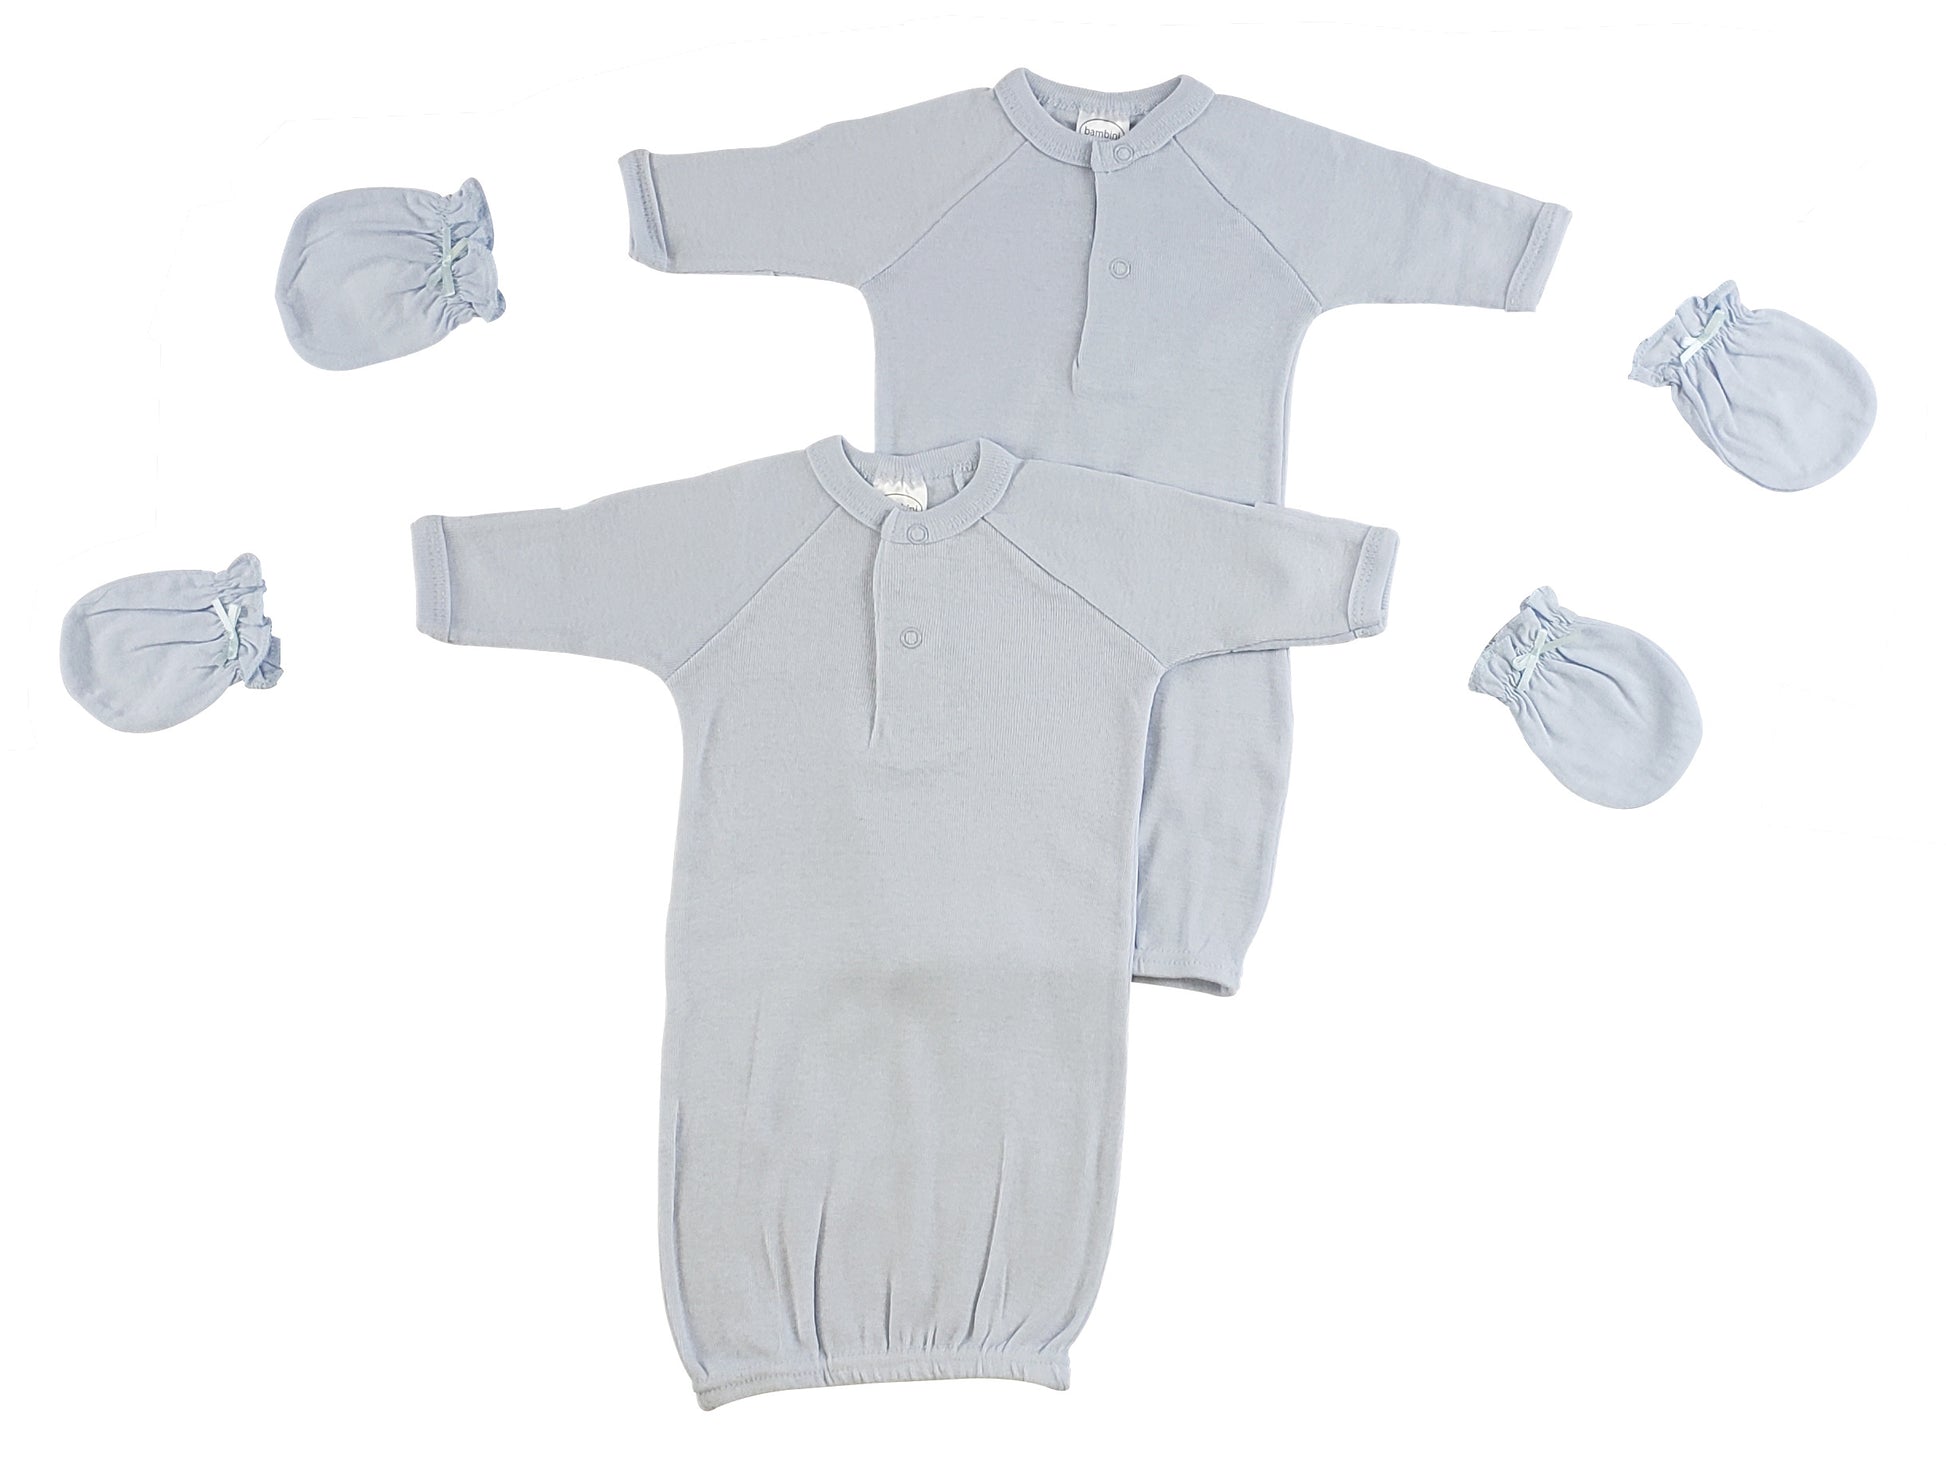 Preemie Boys Gowns and MIttens CS_0071